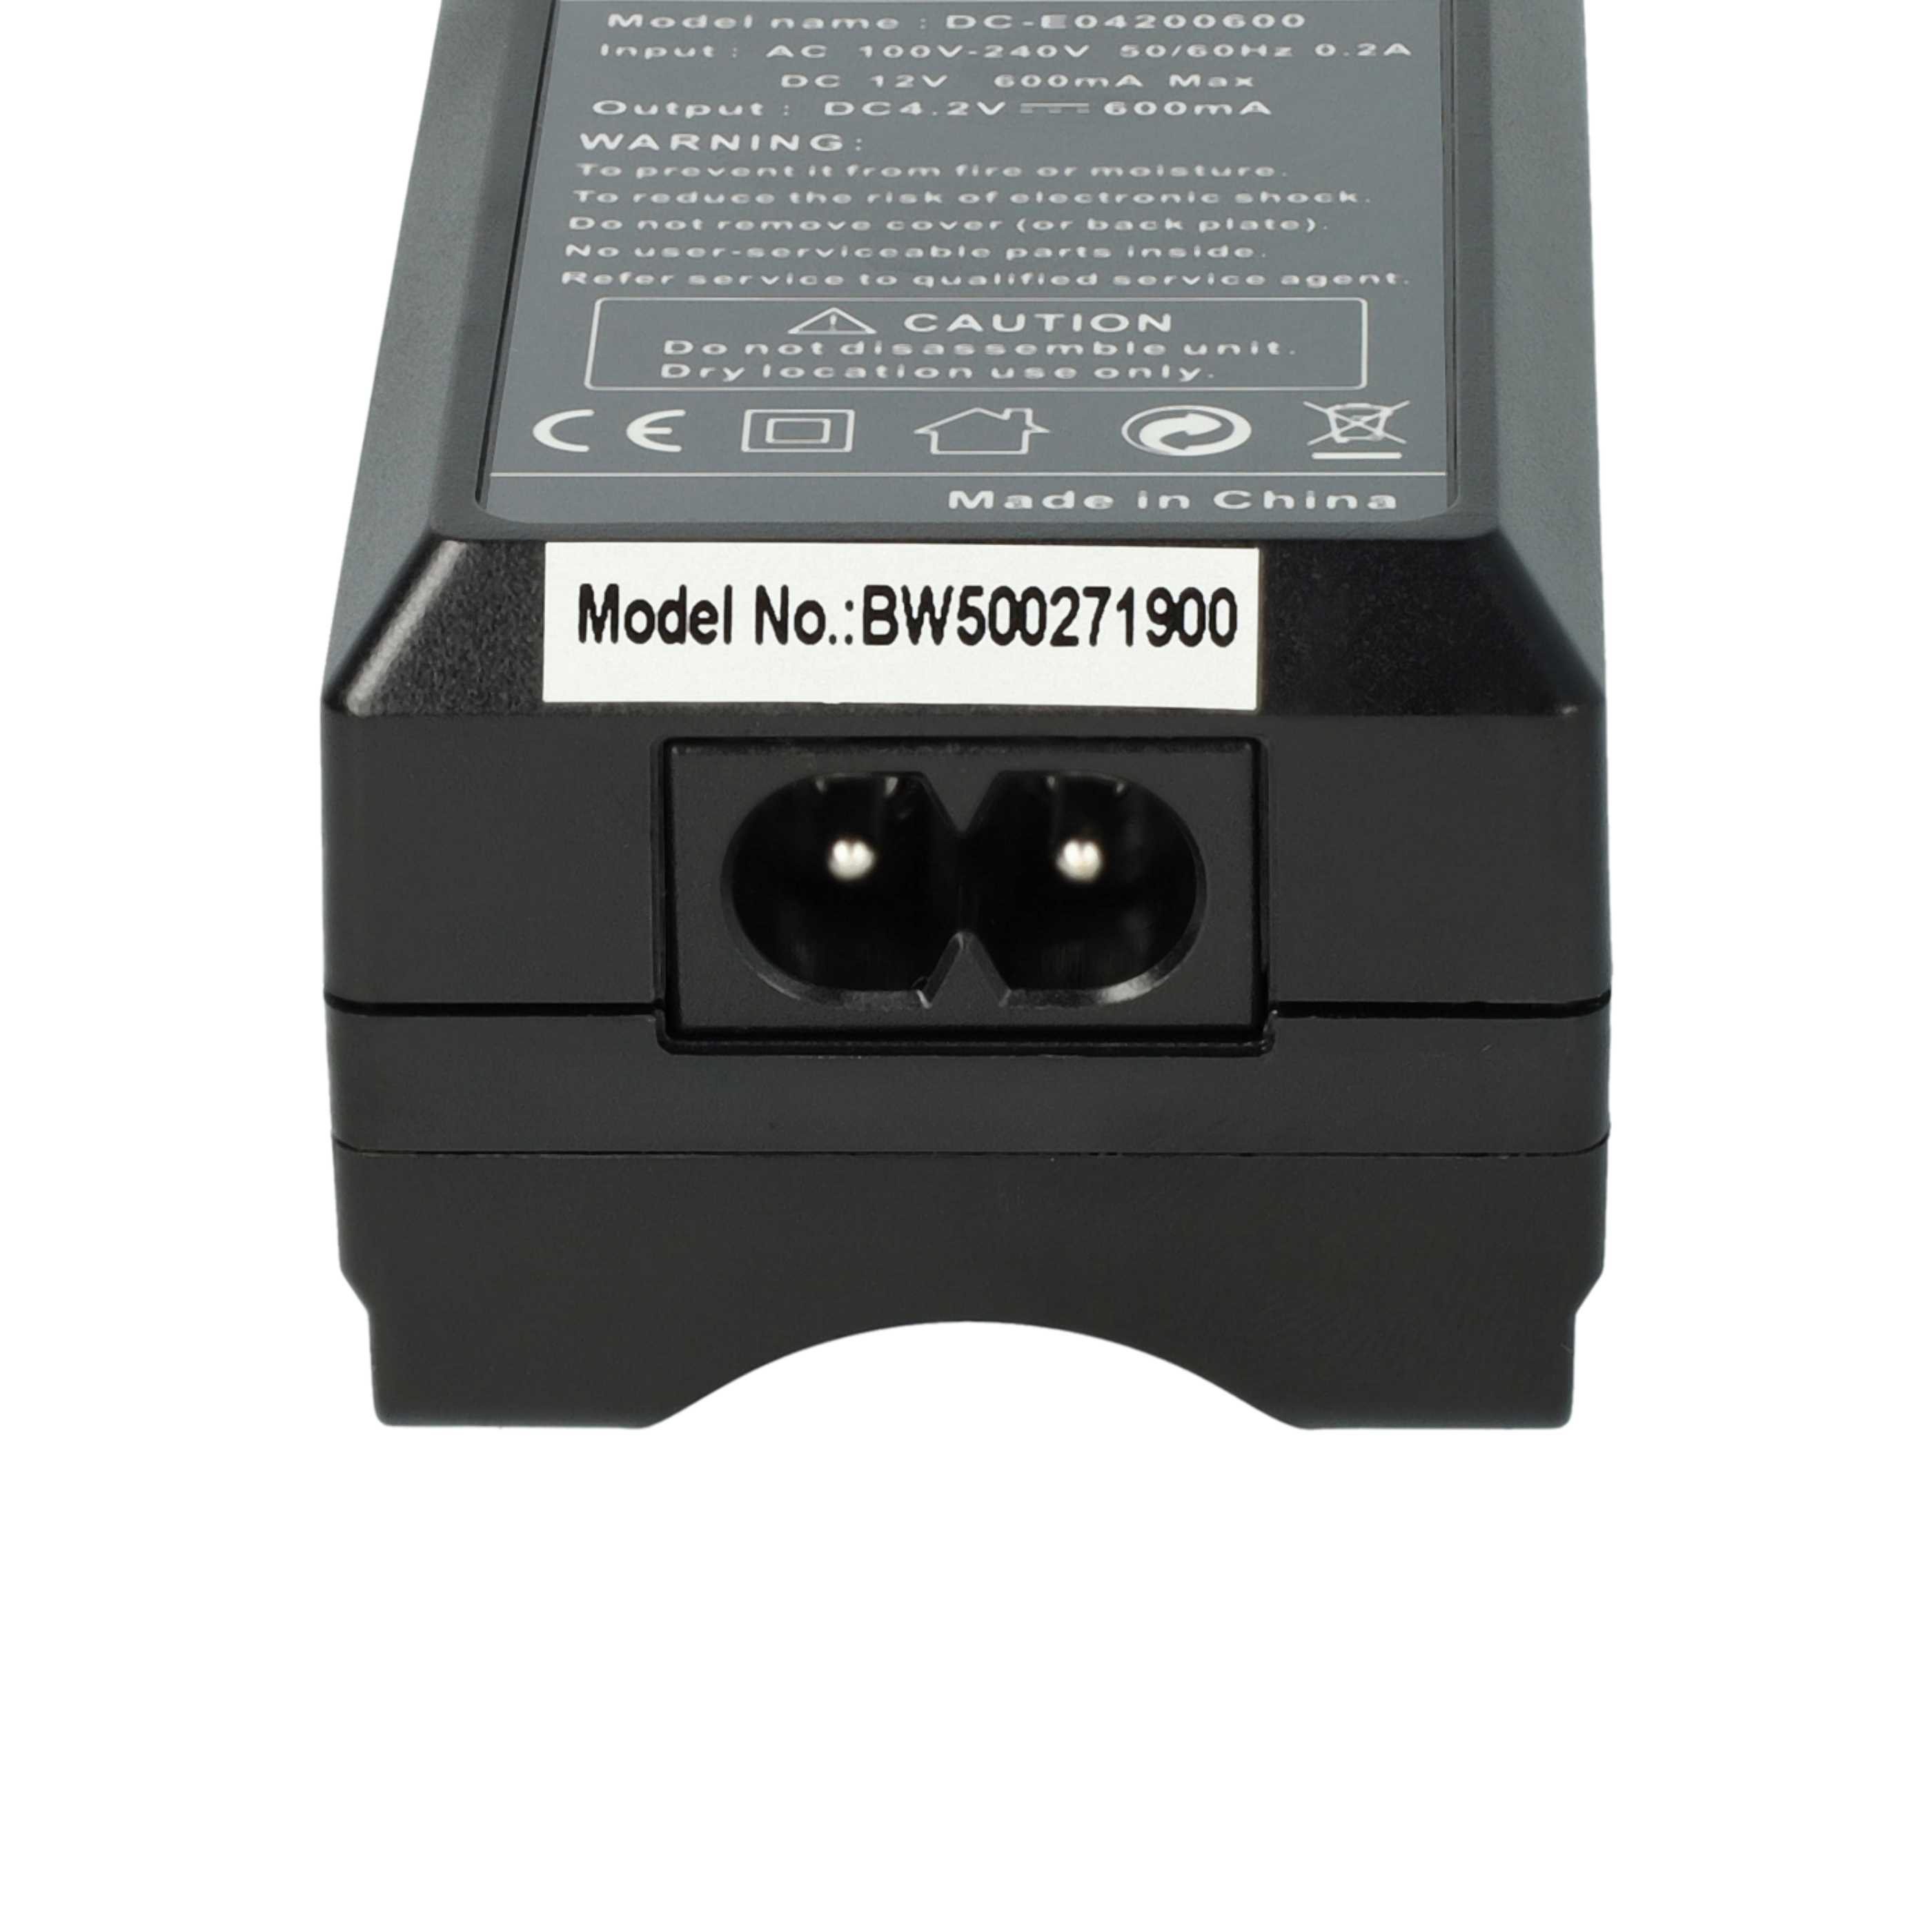 Battery Charger suitable for Hyundai Digital Camera - 0.6 A, 8.4 V